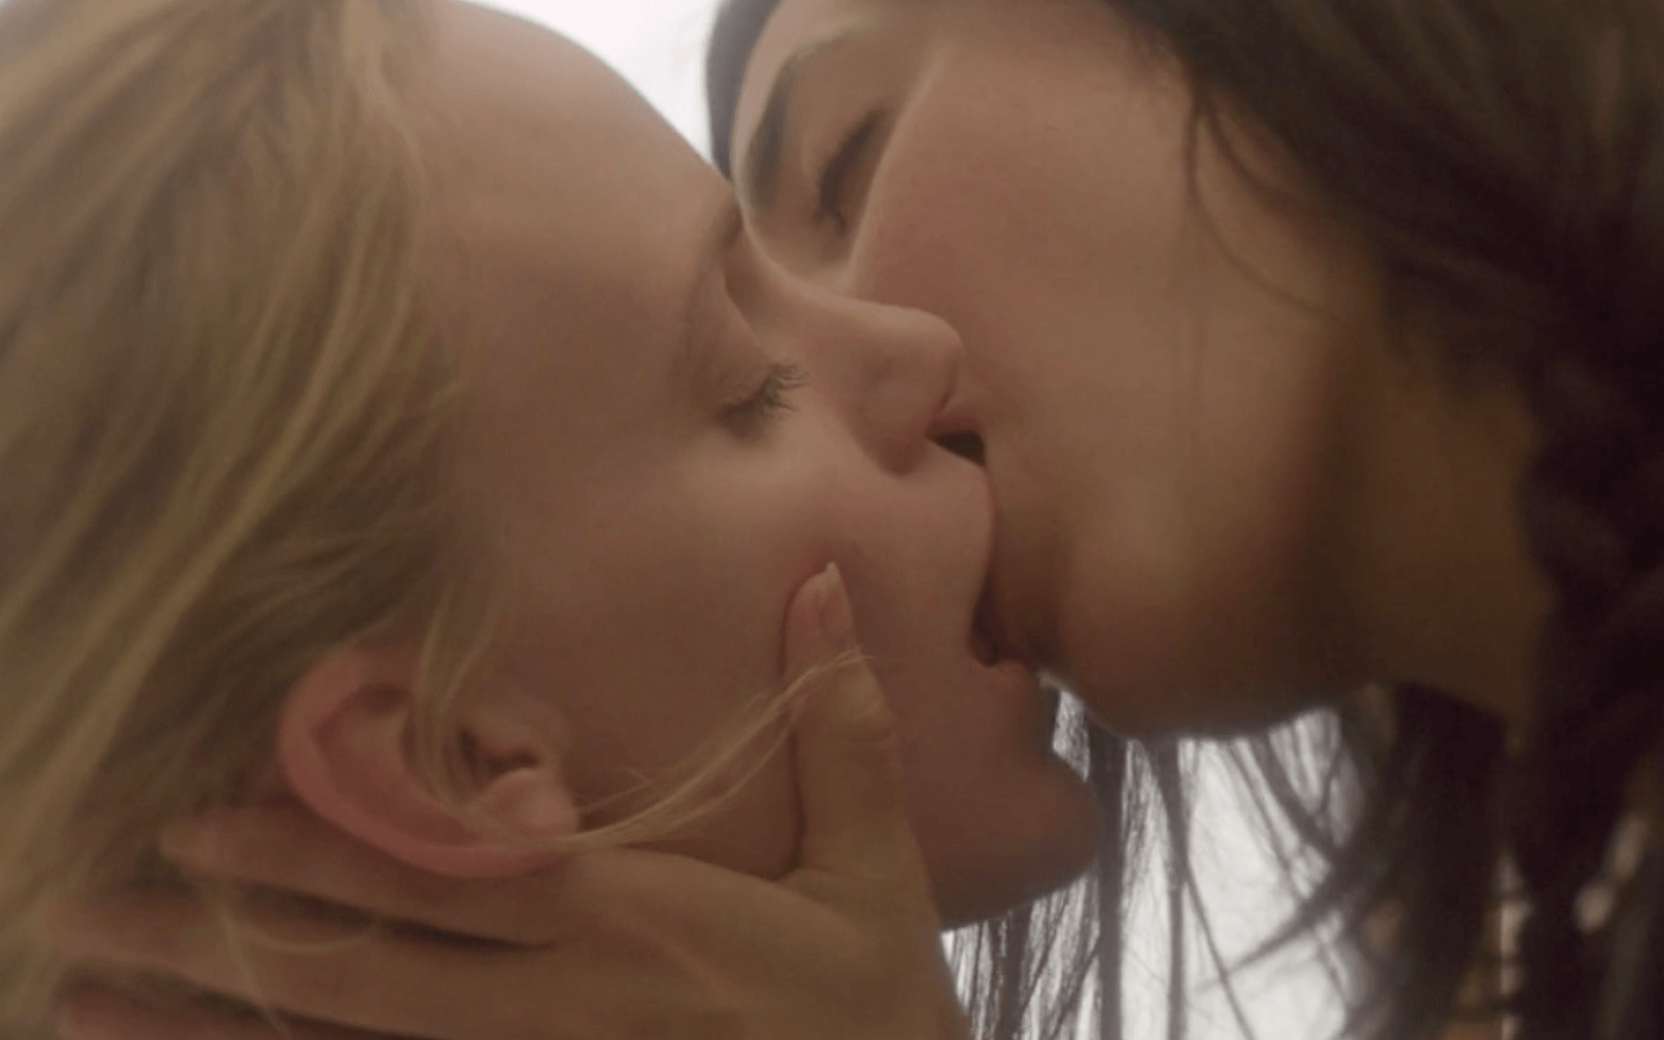 Lesbian forces girl to kiss